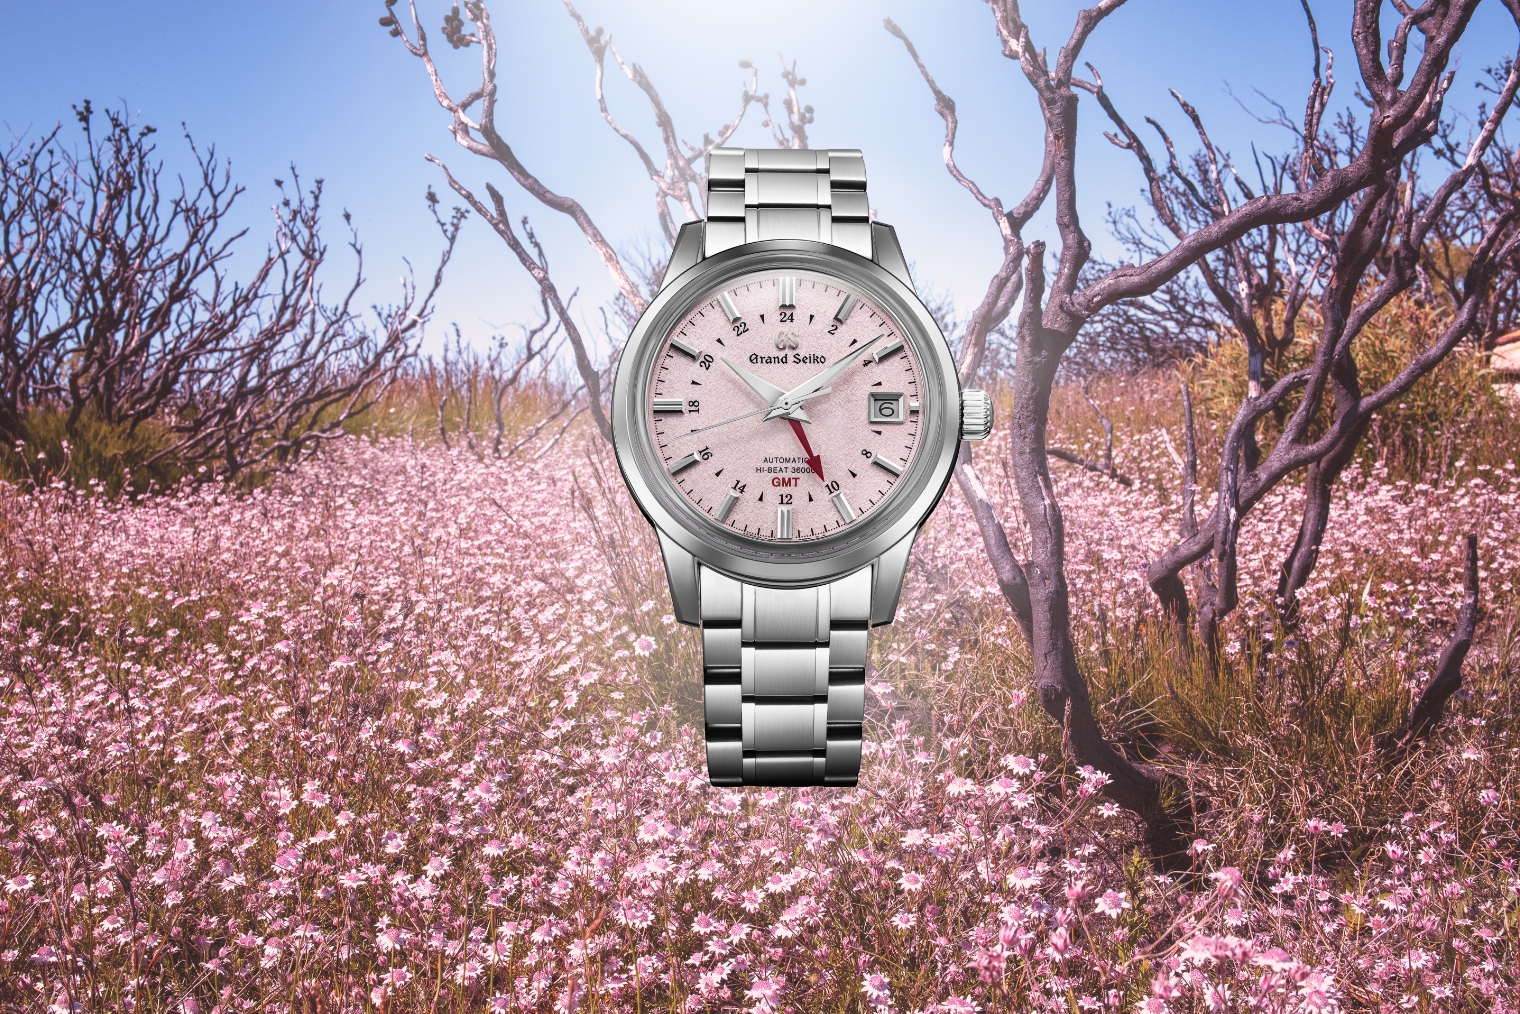 Seiko forest conservation initiatives around the world